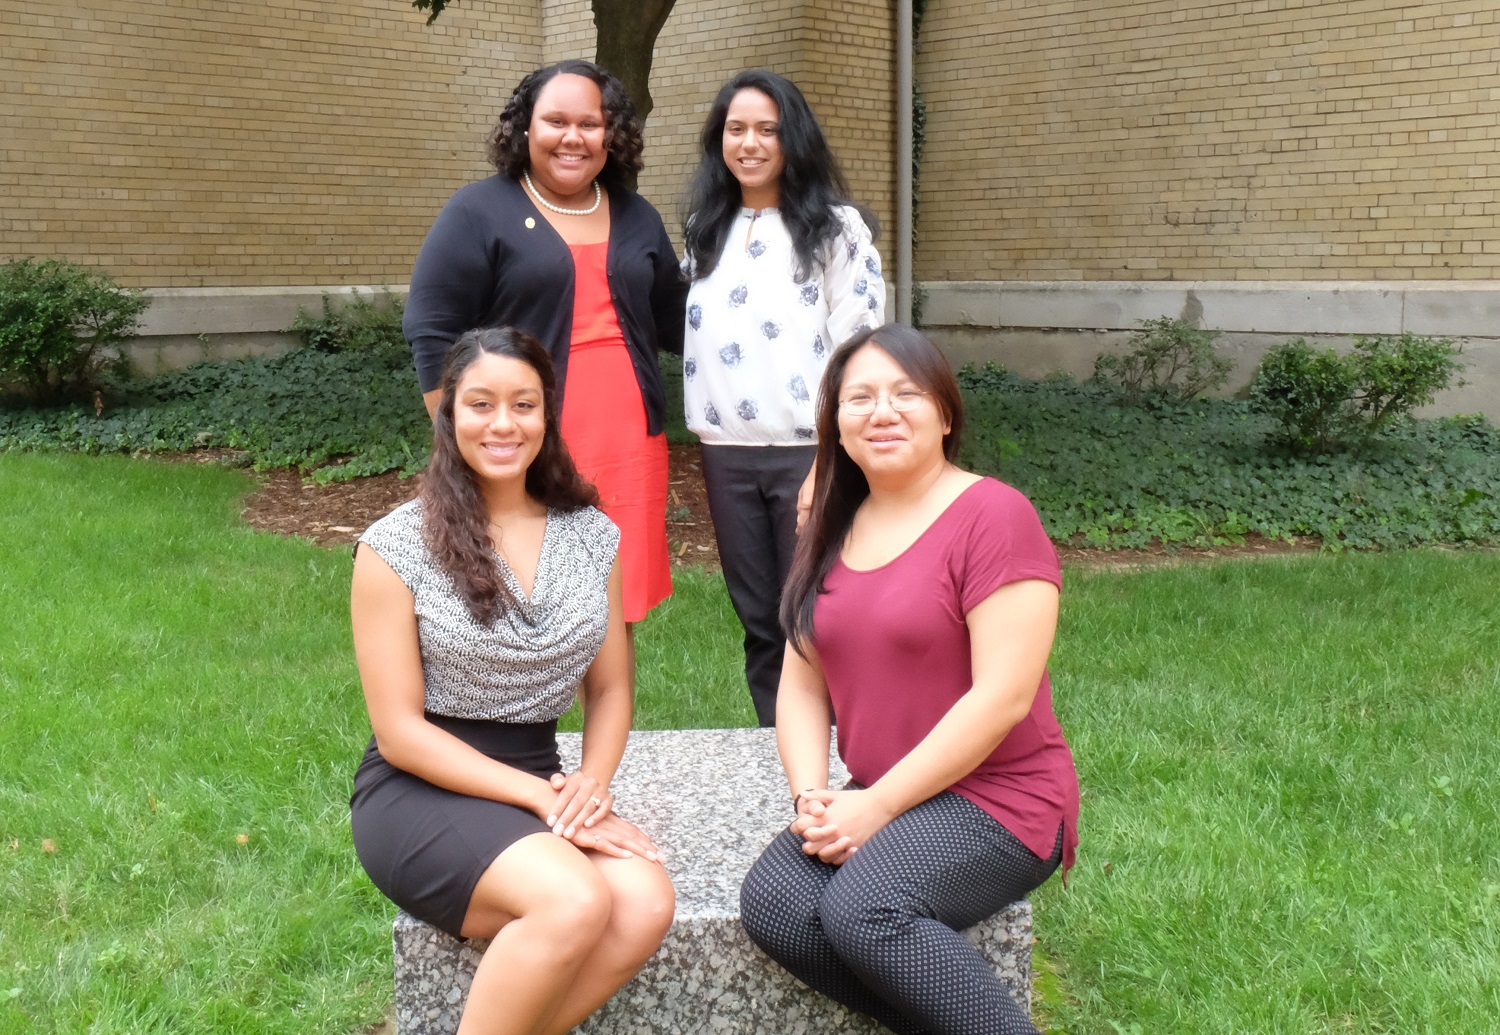 Left to right, 2016-17 UofL Health and Social Justice Scholars Ashton Green, Jade Montanez, Mallika Sabharwal and Diana Kuo